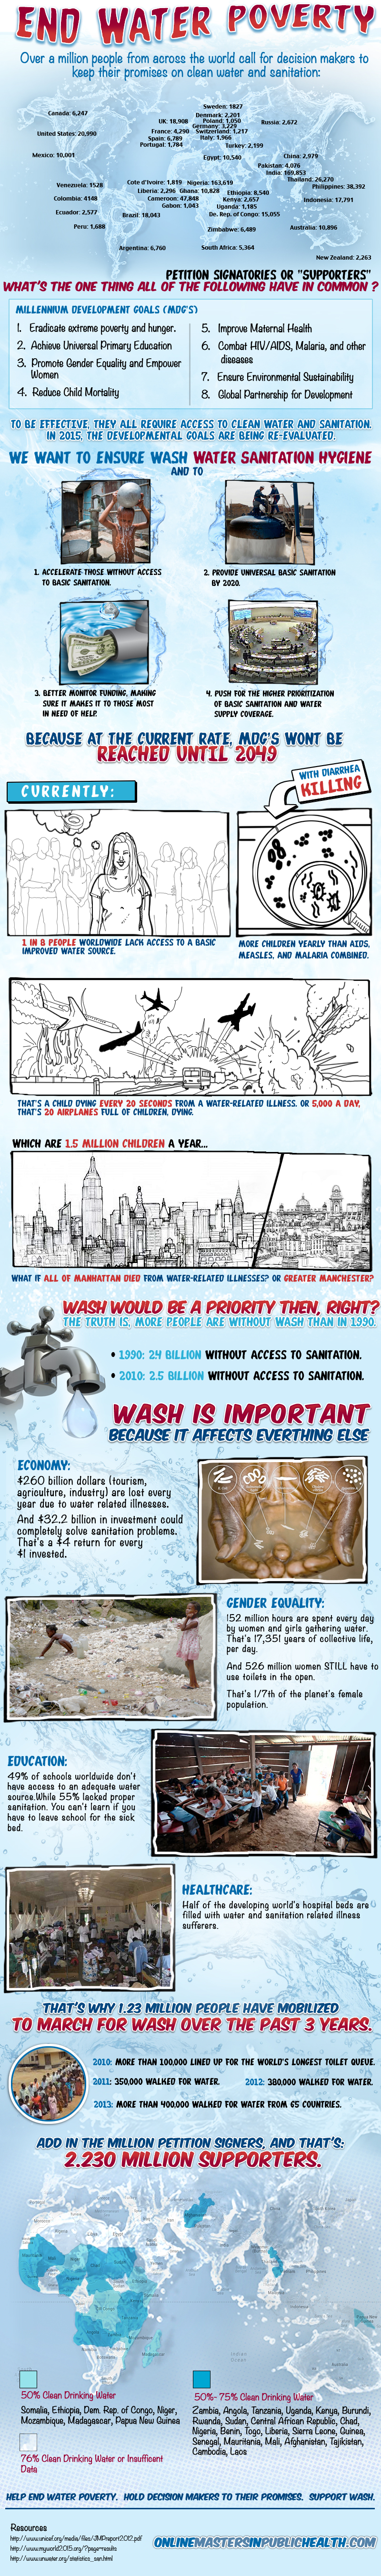 End Water Poverty